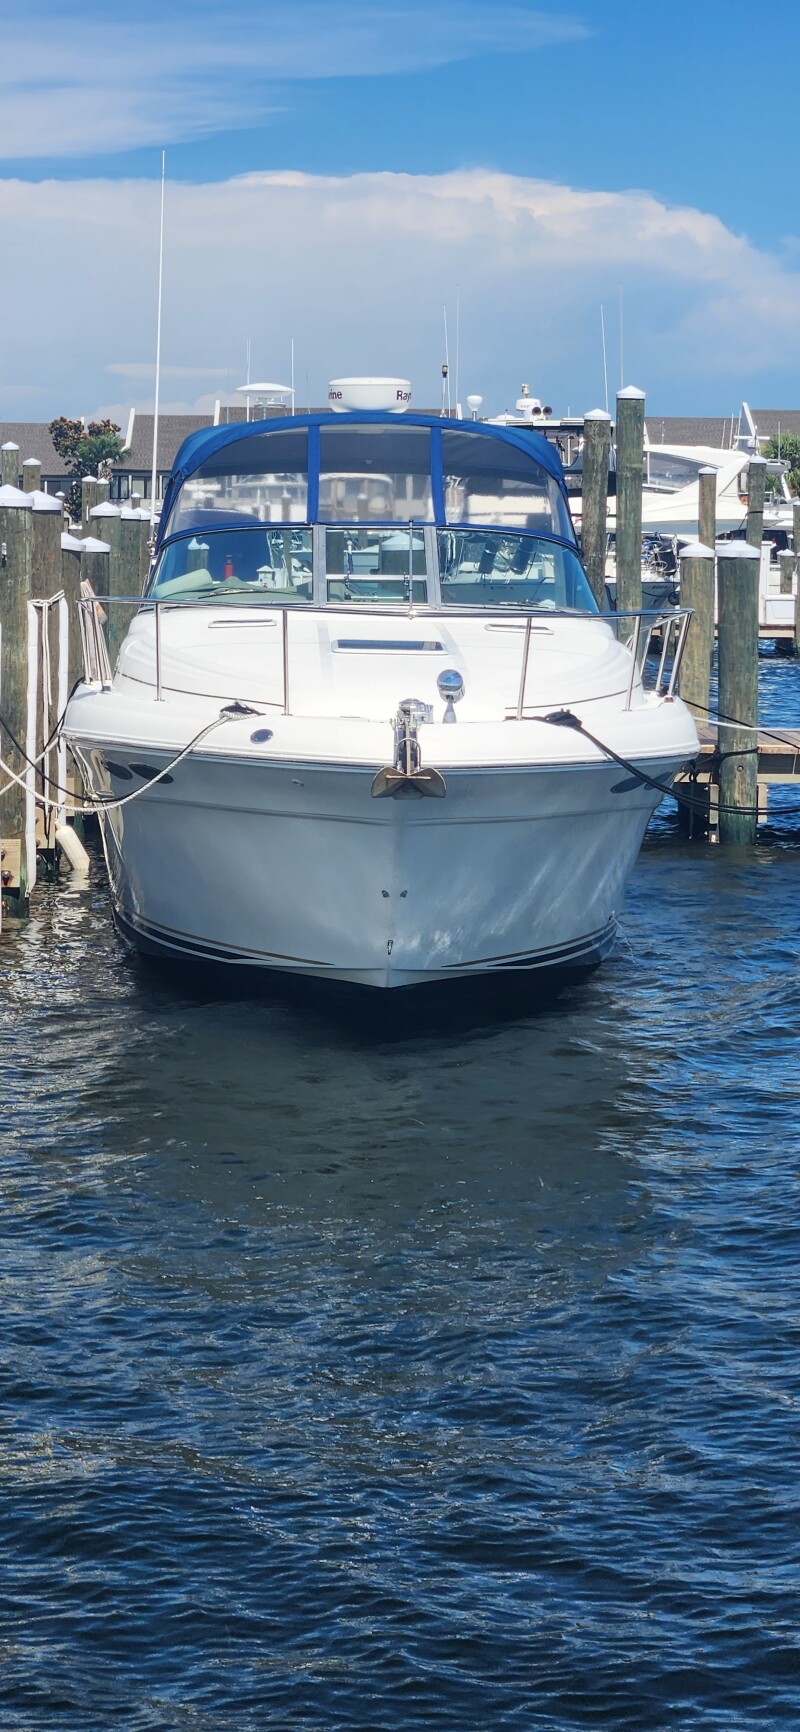 2000 Sea Ray 340 Power boat for sale in Lynn Haven, FL - image 8 